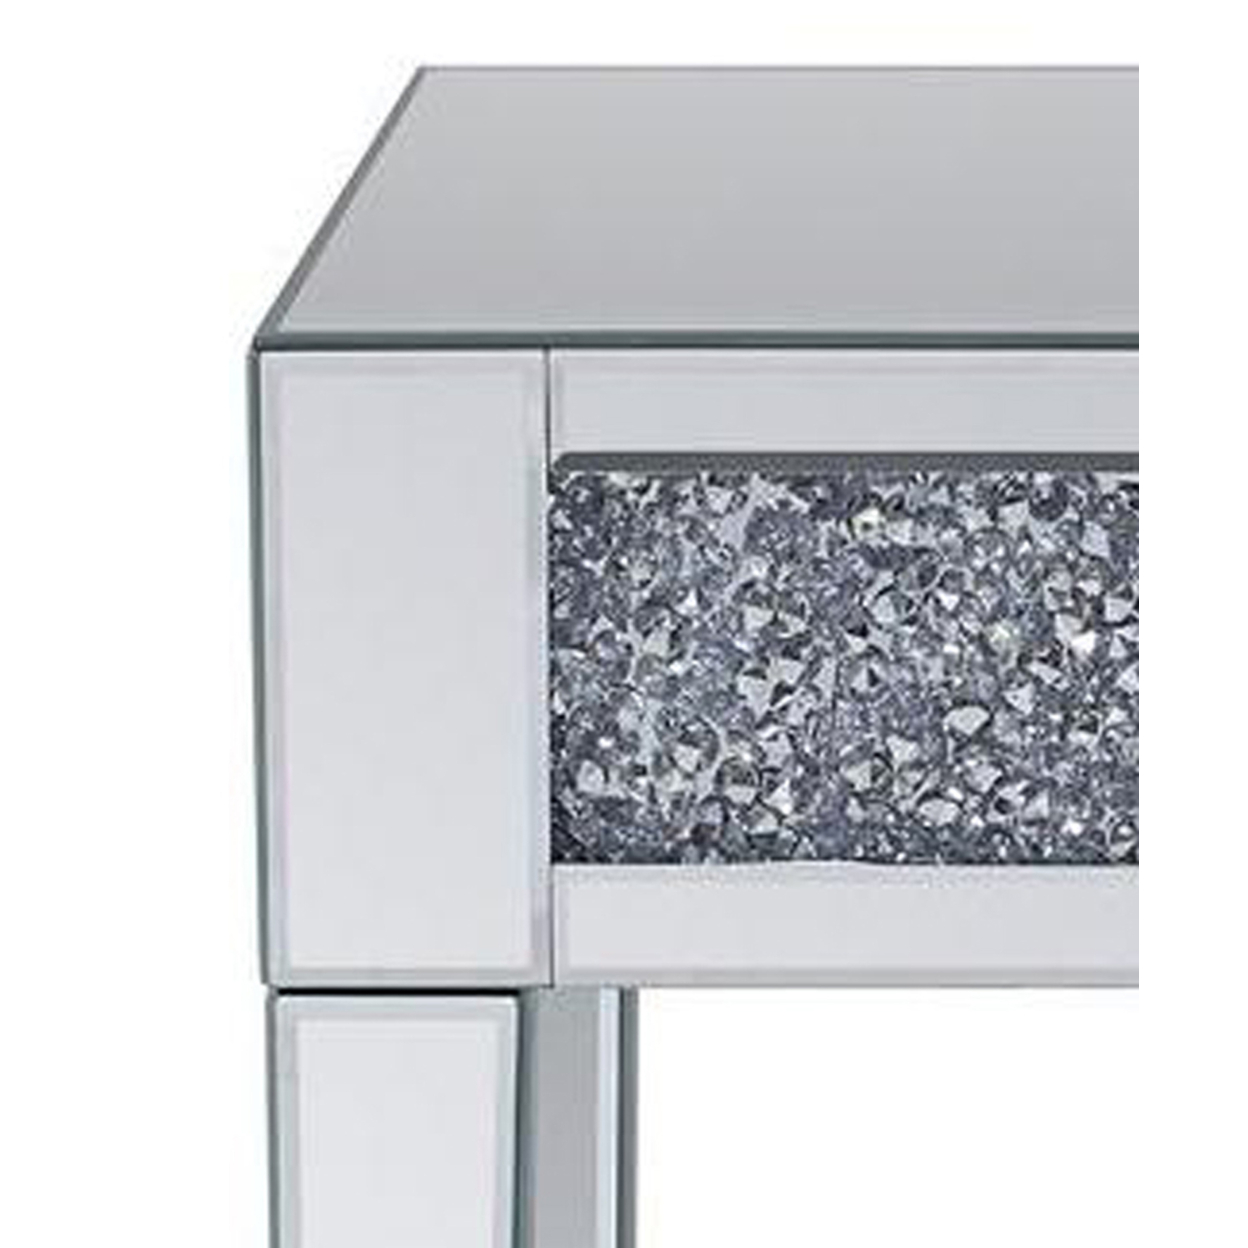 Wood And Mirror End Table With Faux Crystals Inlay, Clear- Saltoro Sherpi